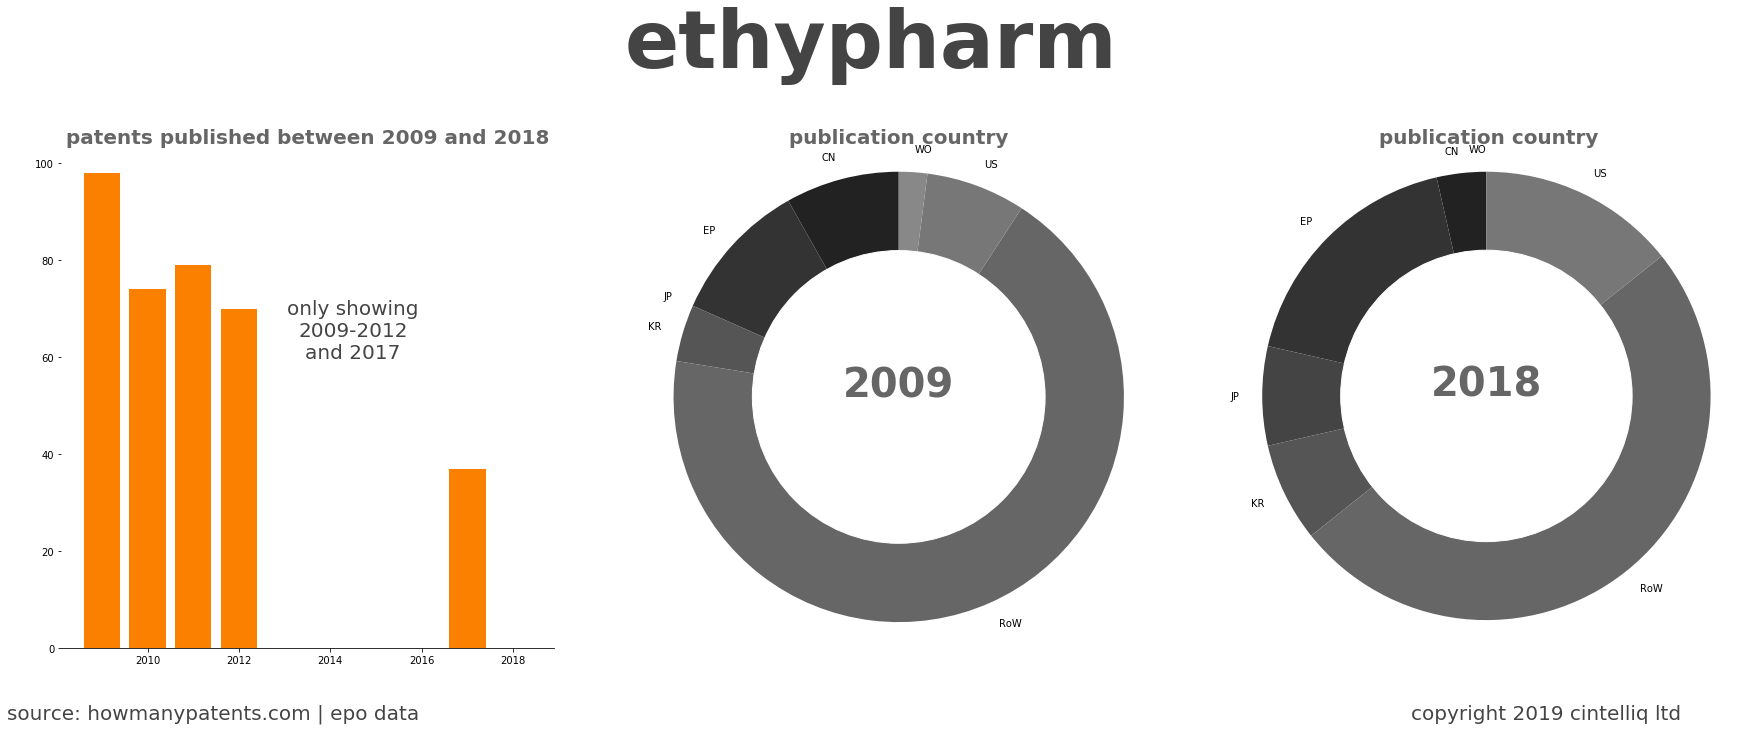 summary of patents for Ethypharm